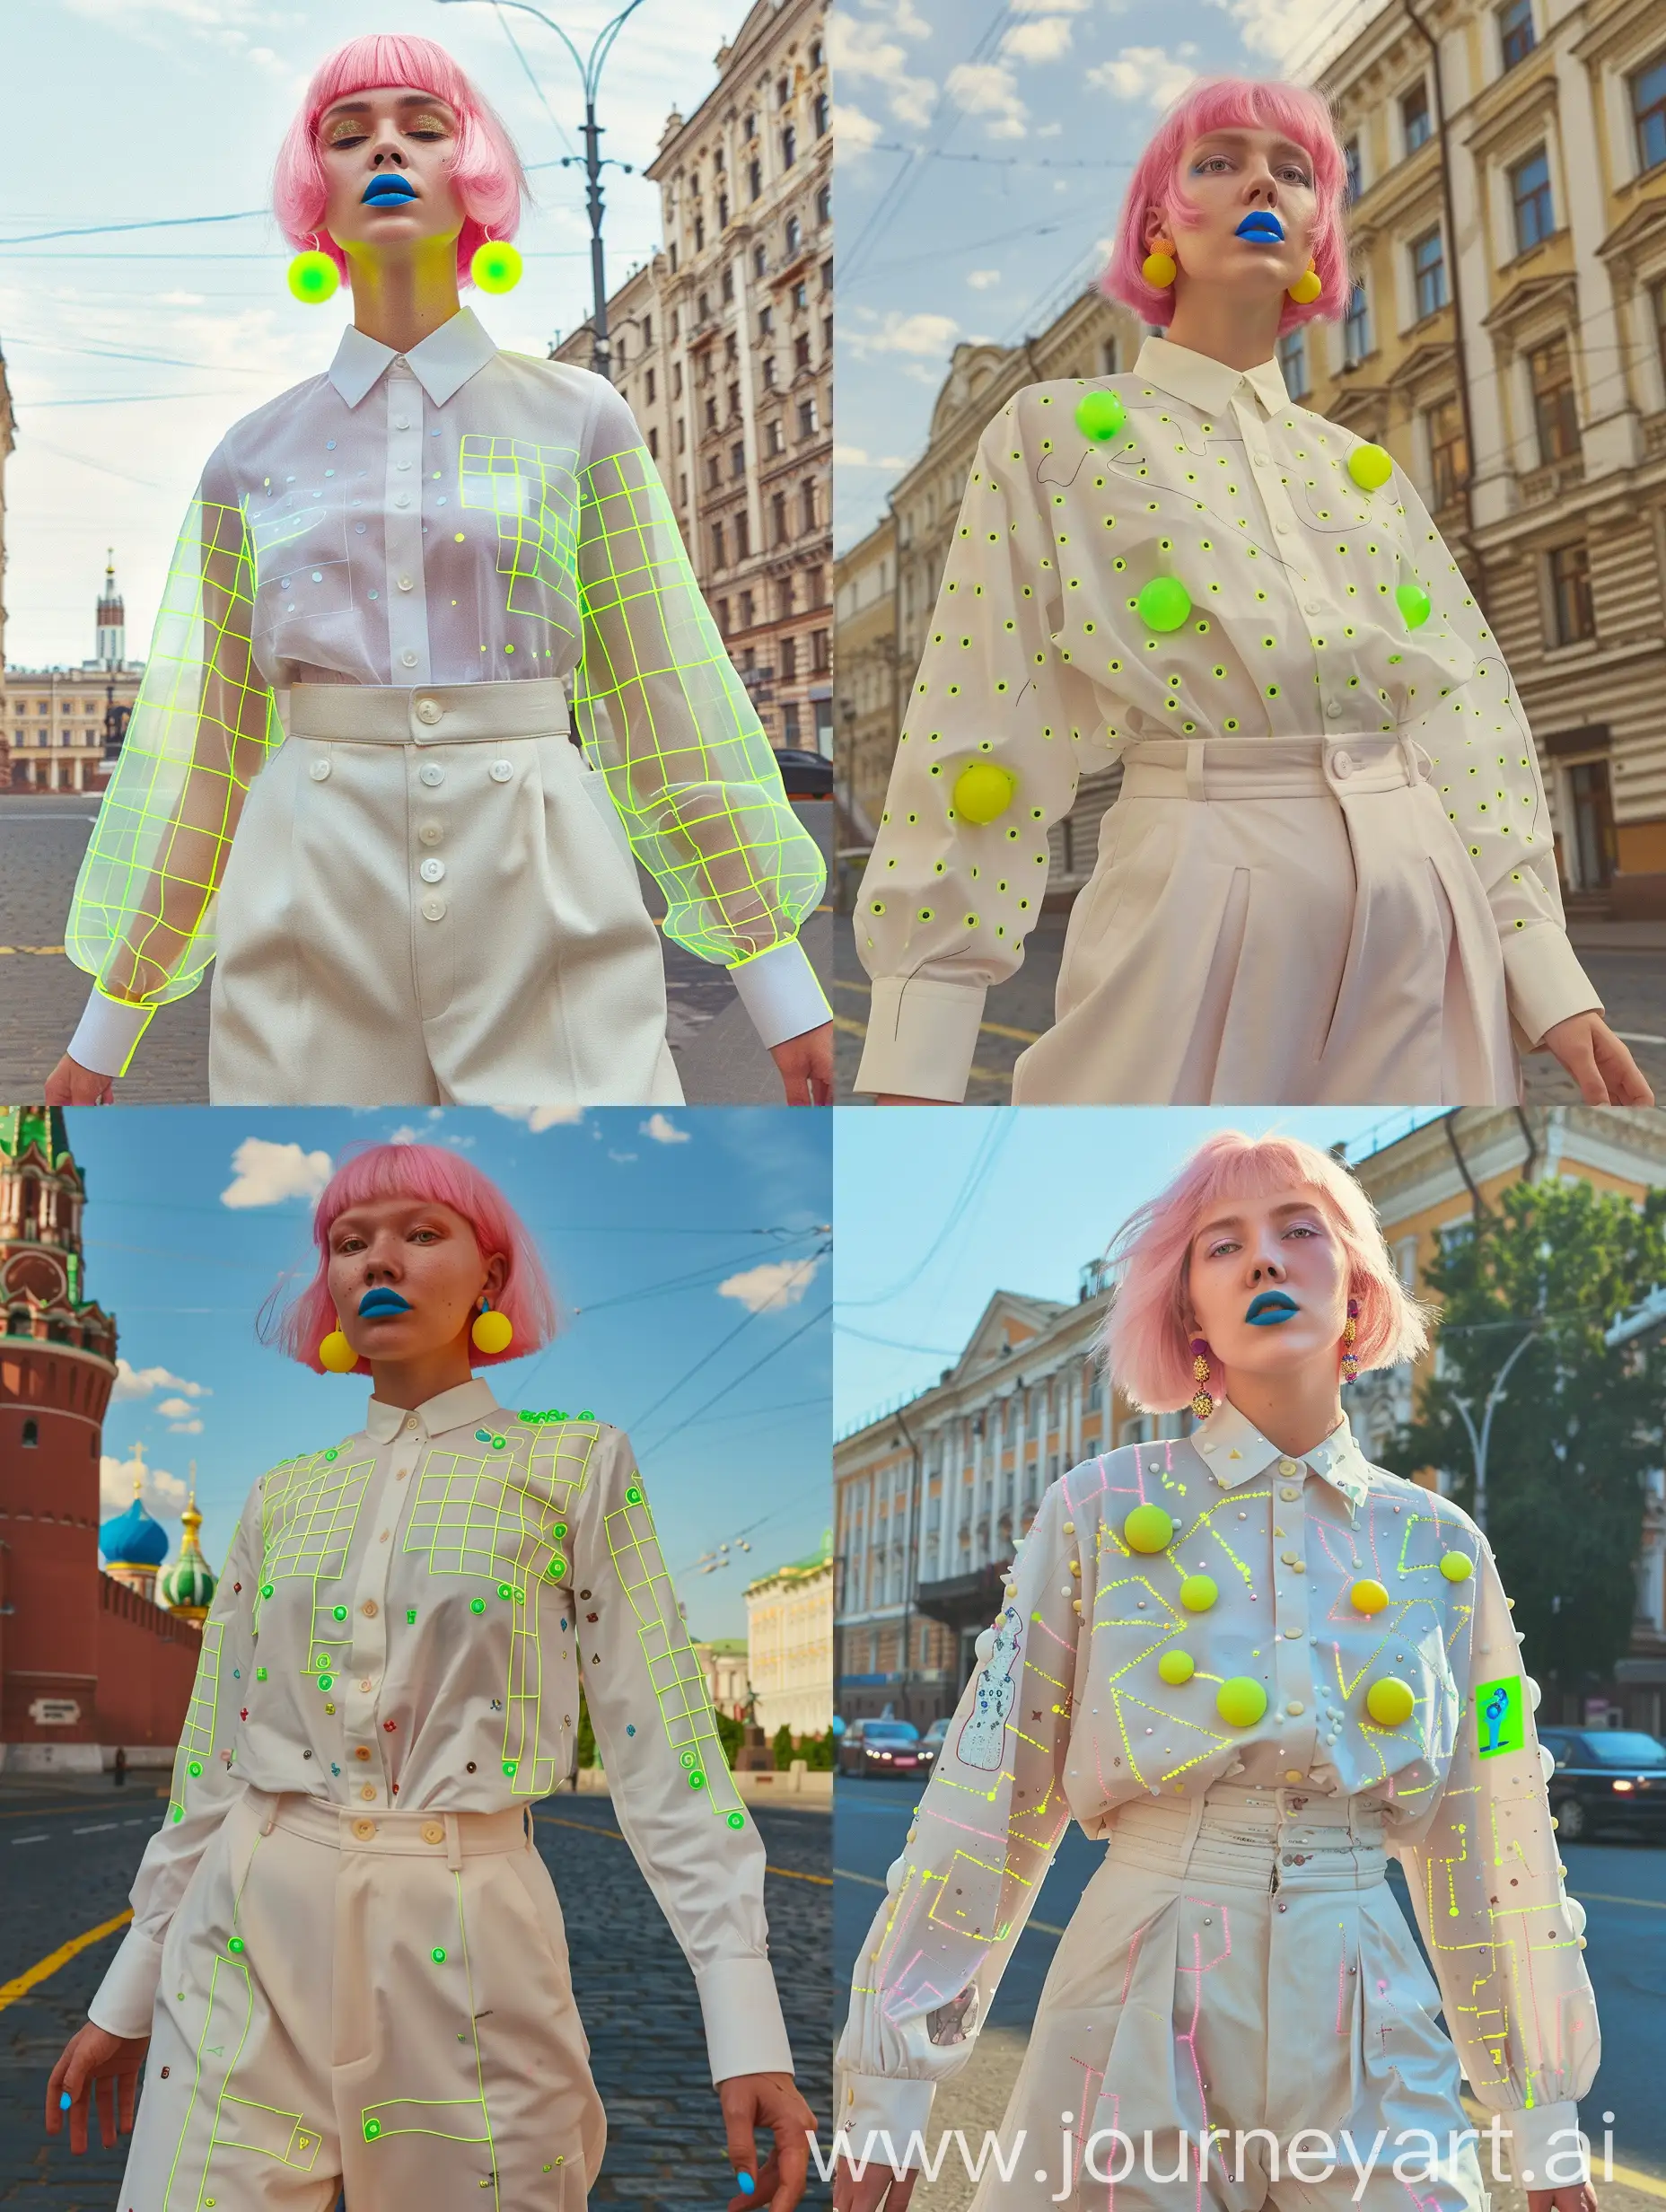 HyperRealistic-Model-with-Neon-Accessories-Strolling-Moscow-Streets